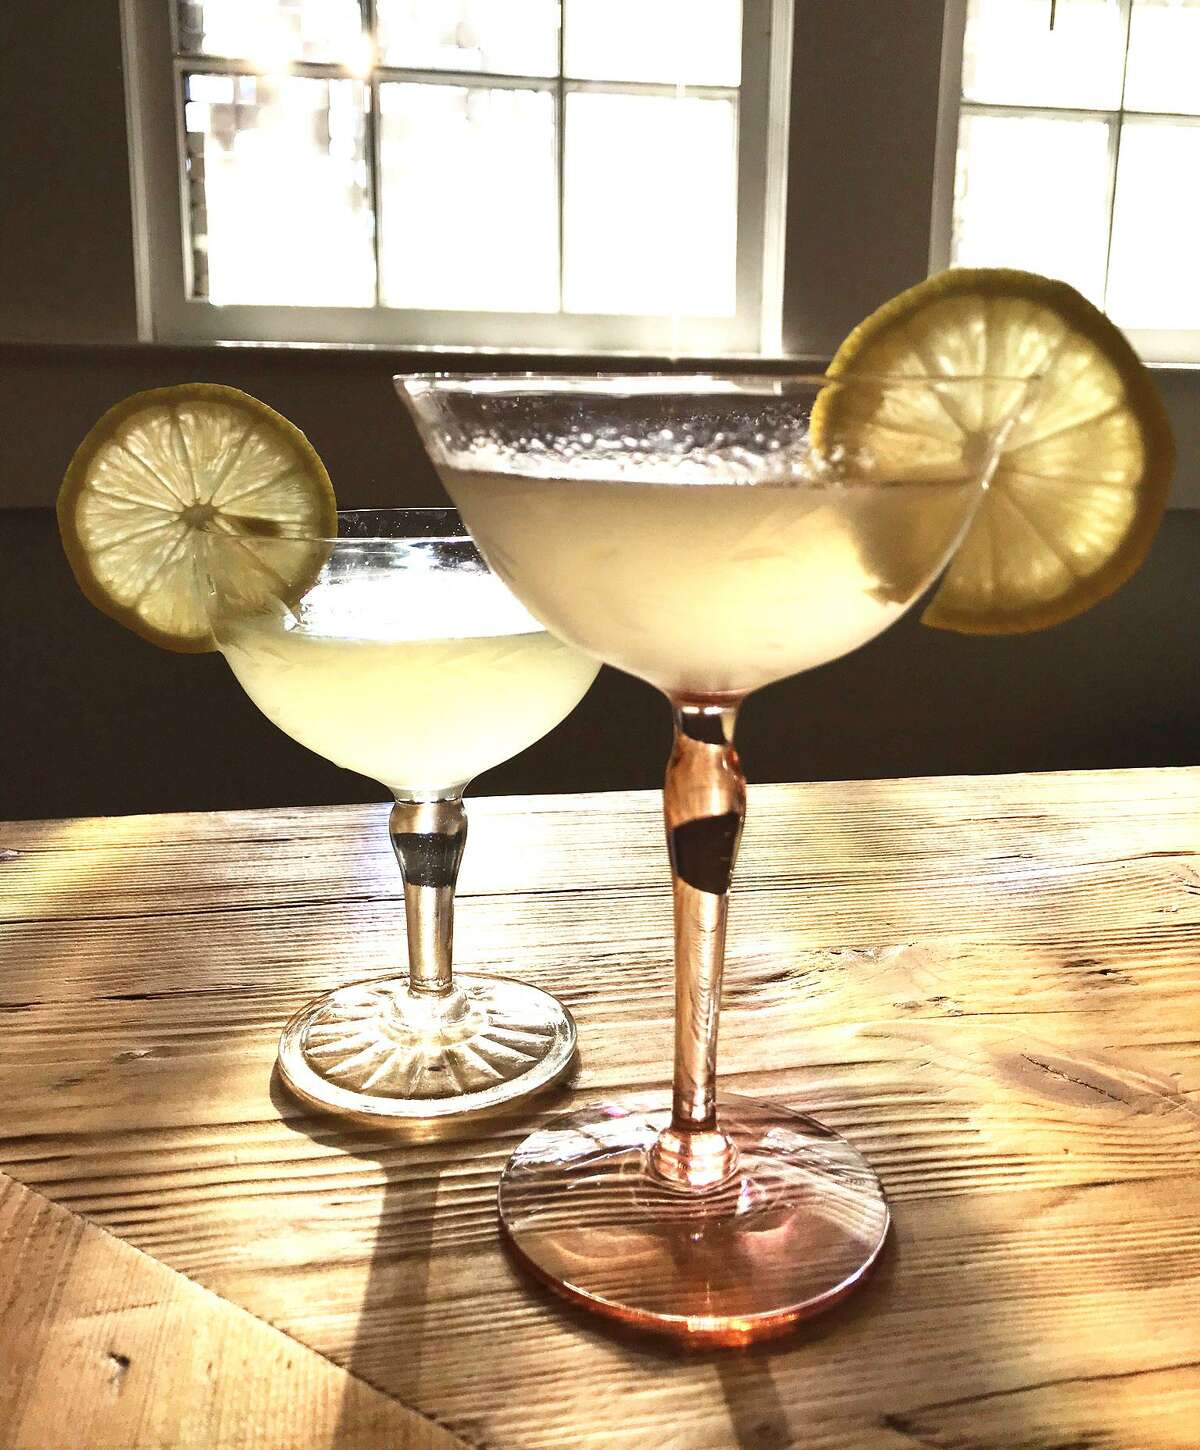 St. George and the Cucumber, left, and St. George and the Basil cocktails